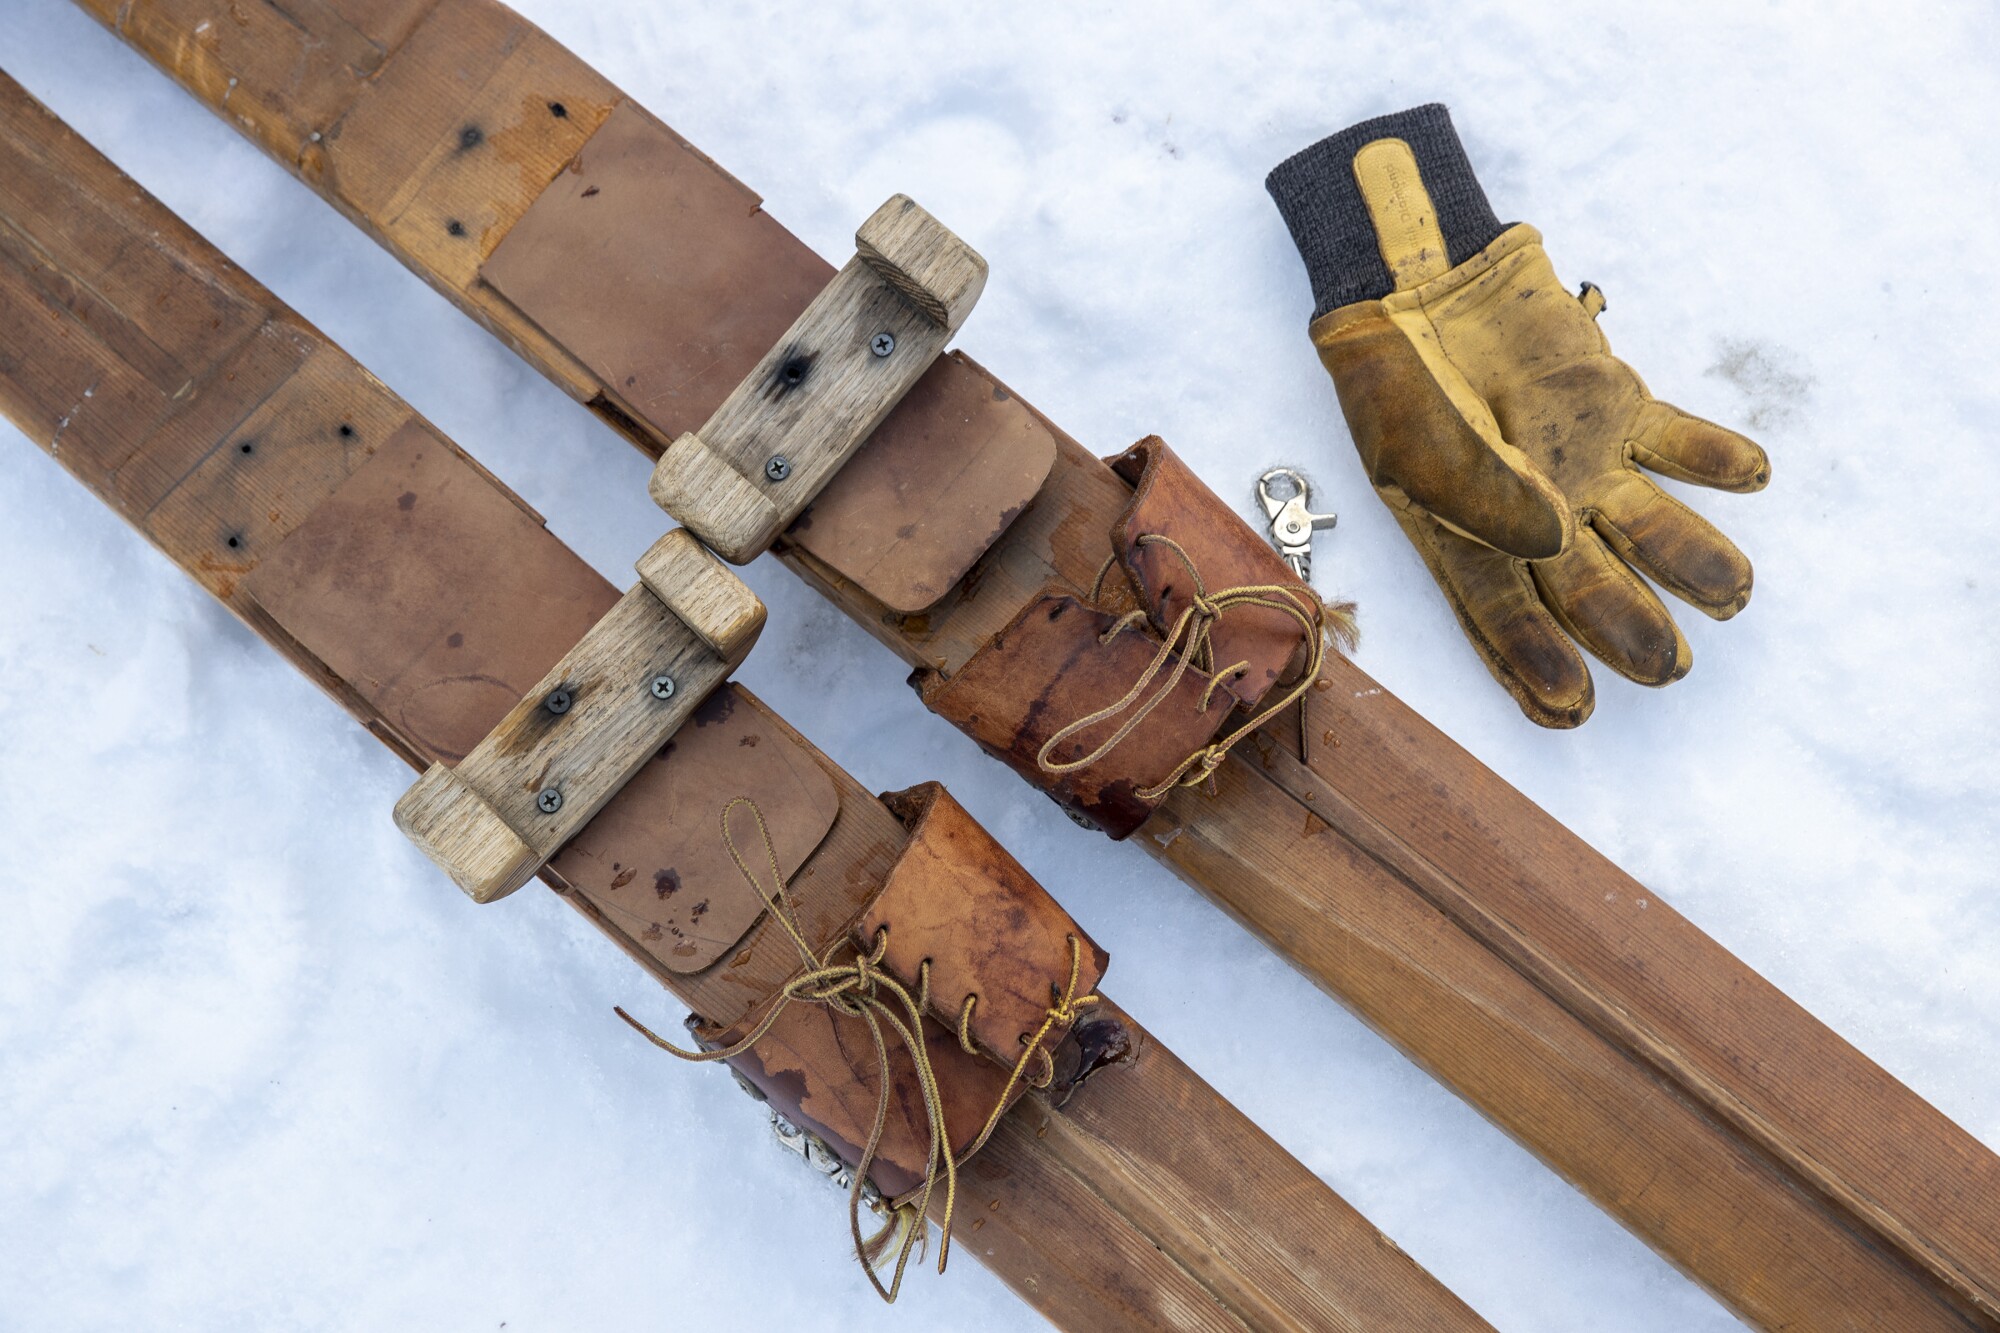 Wooden skis made from pine boards, with leather bindings